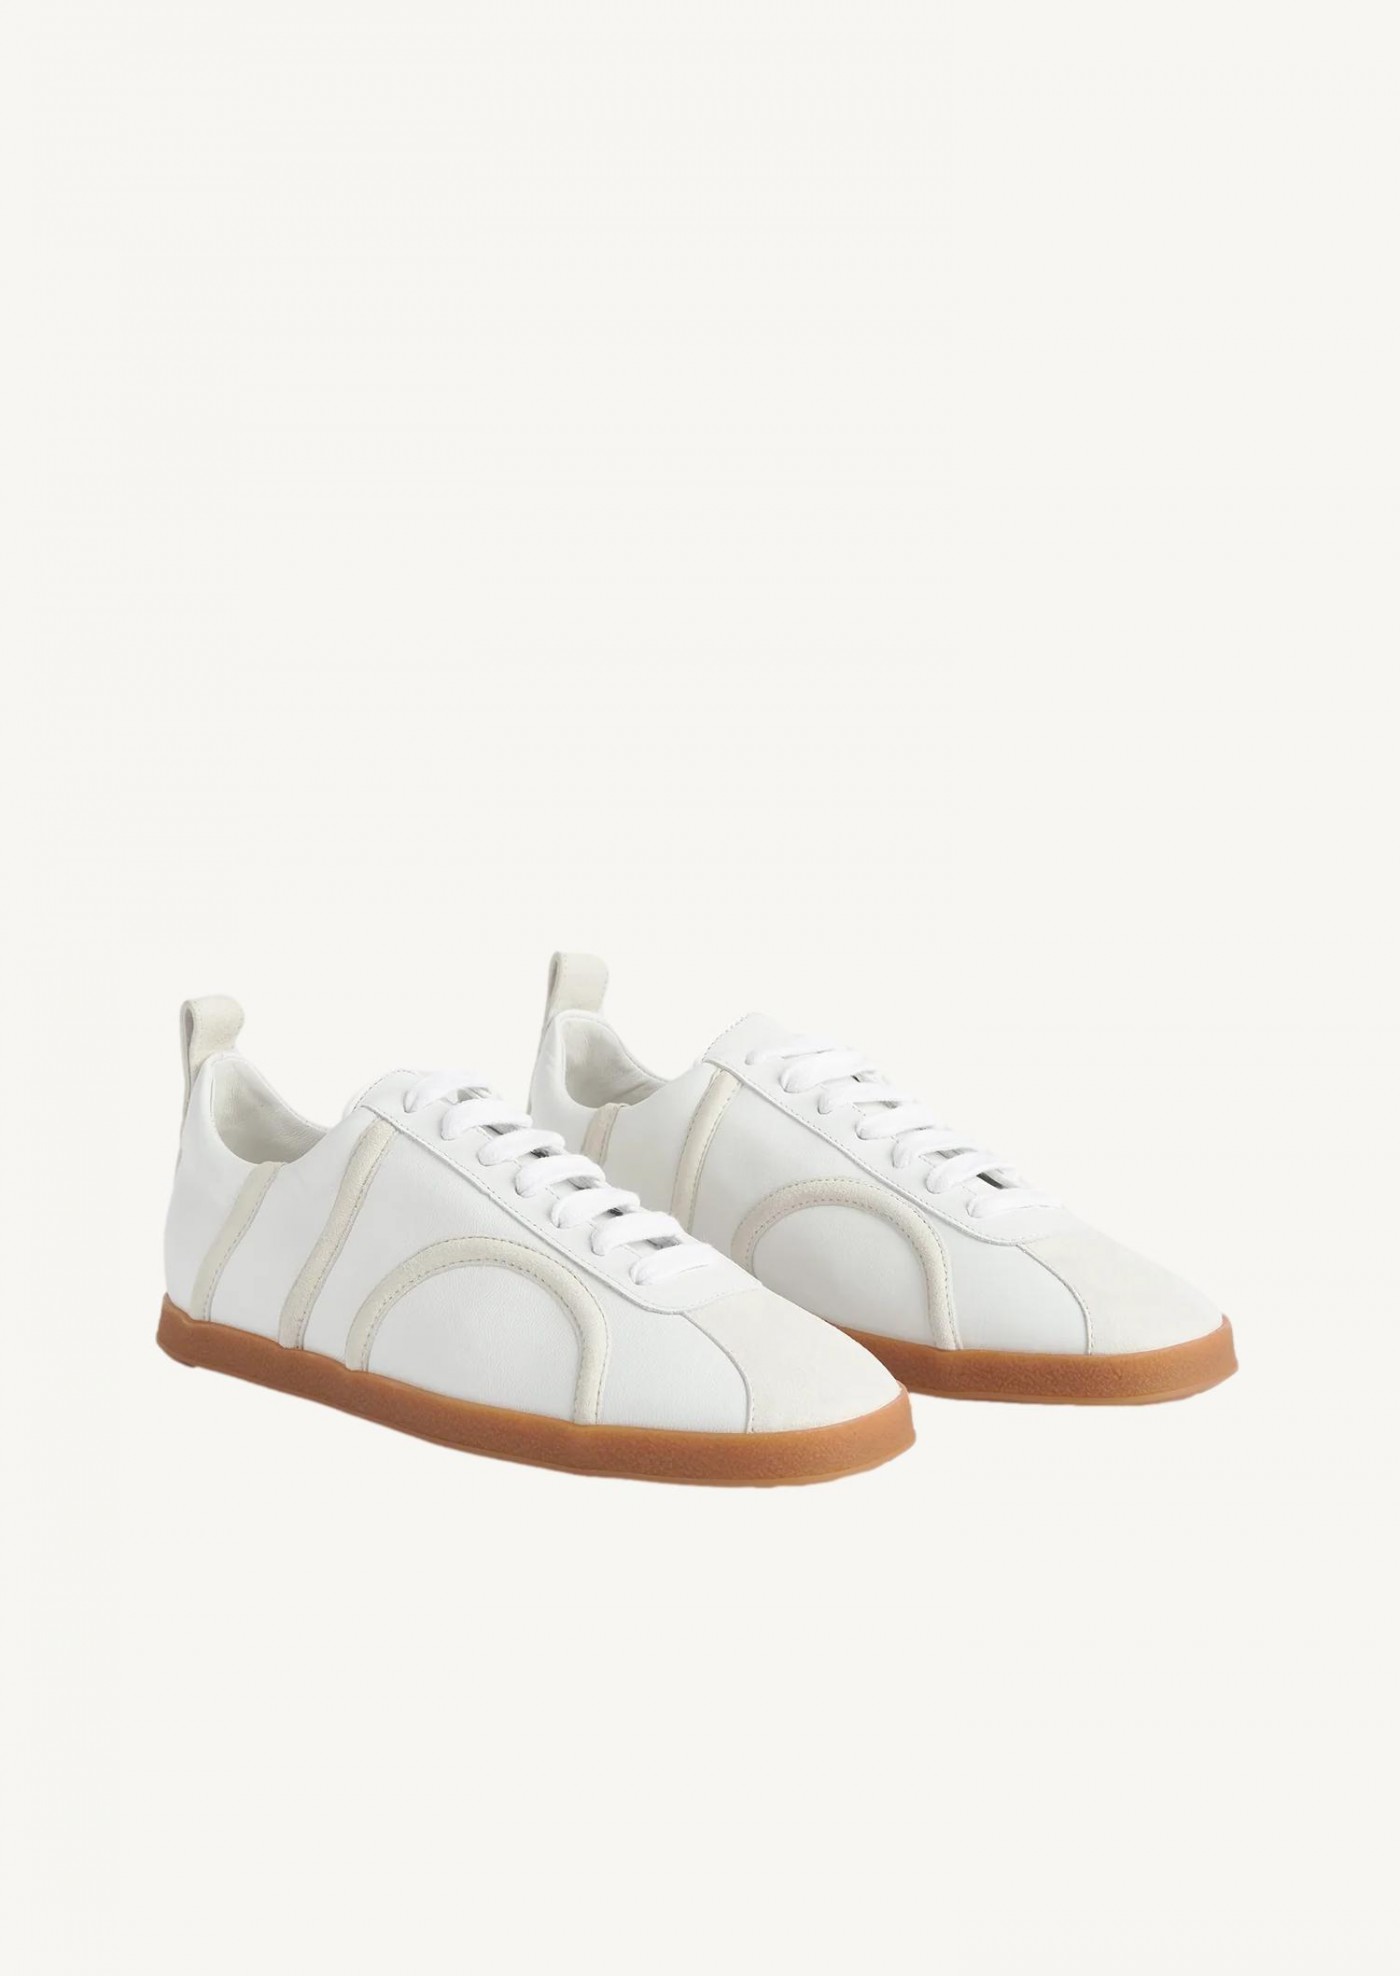 The Leather Sneaker off-white